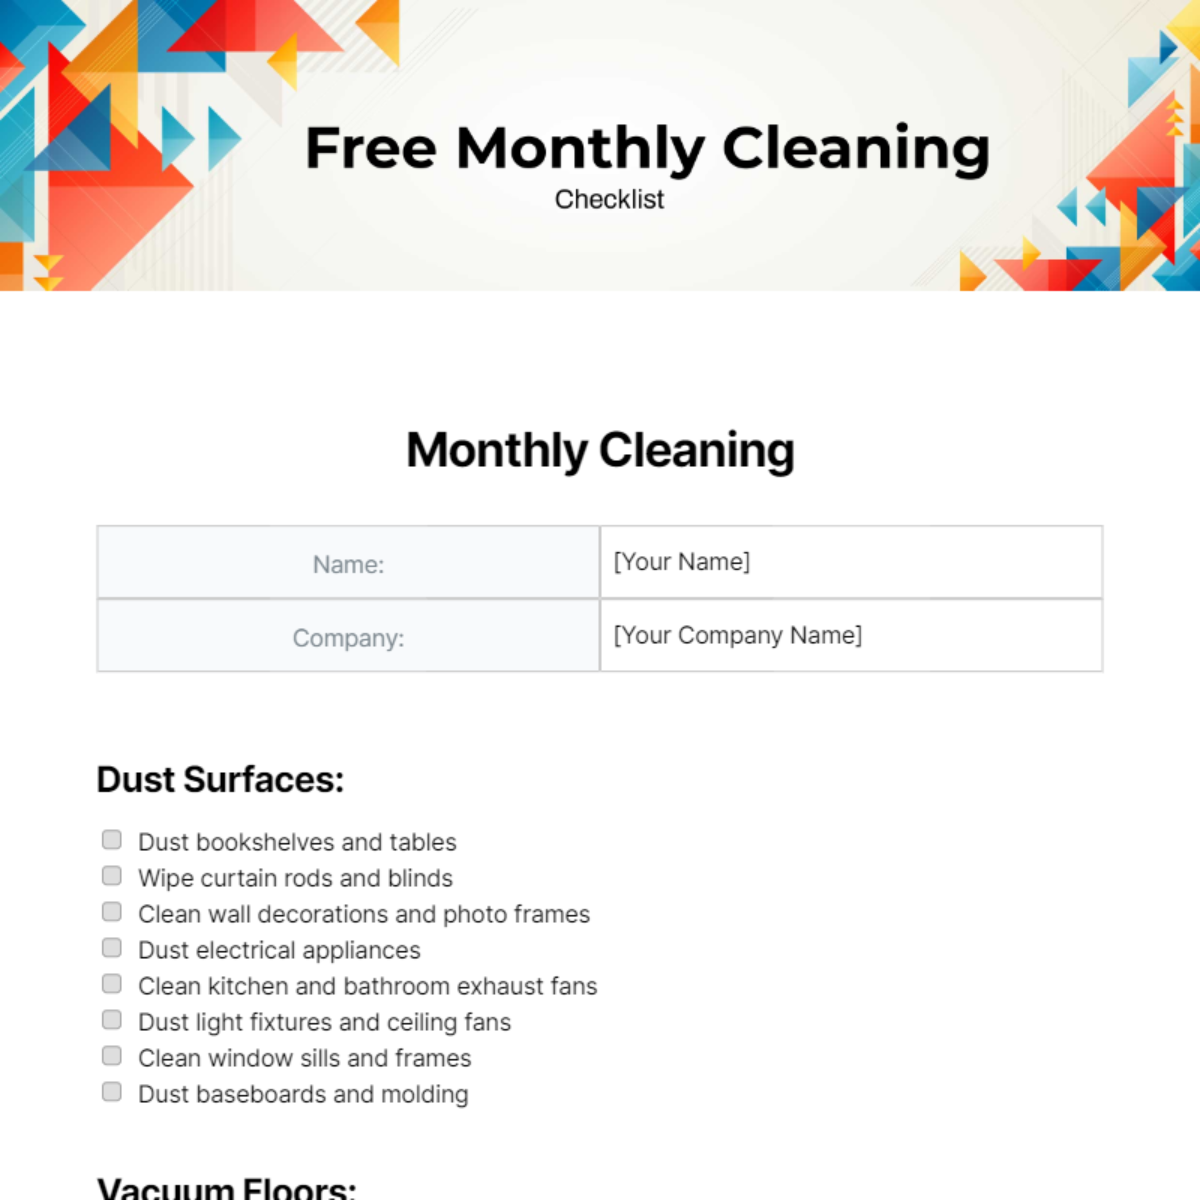 Free Monthly Cleaning Checklist Template